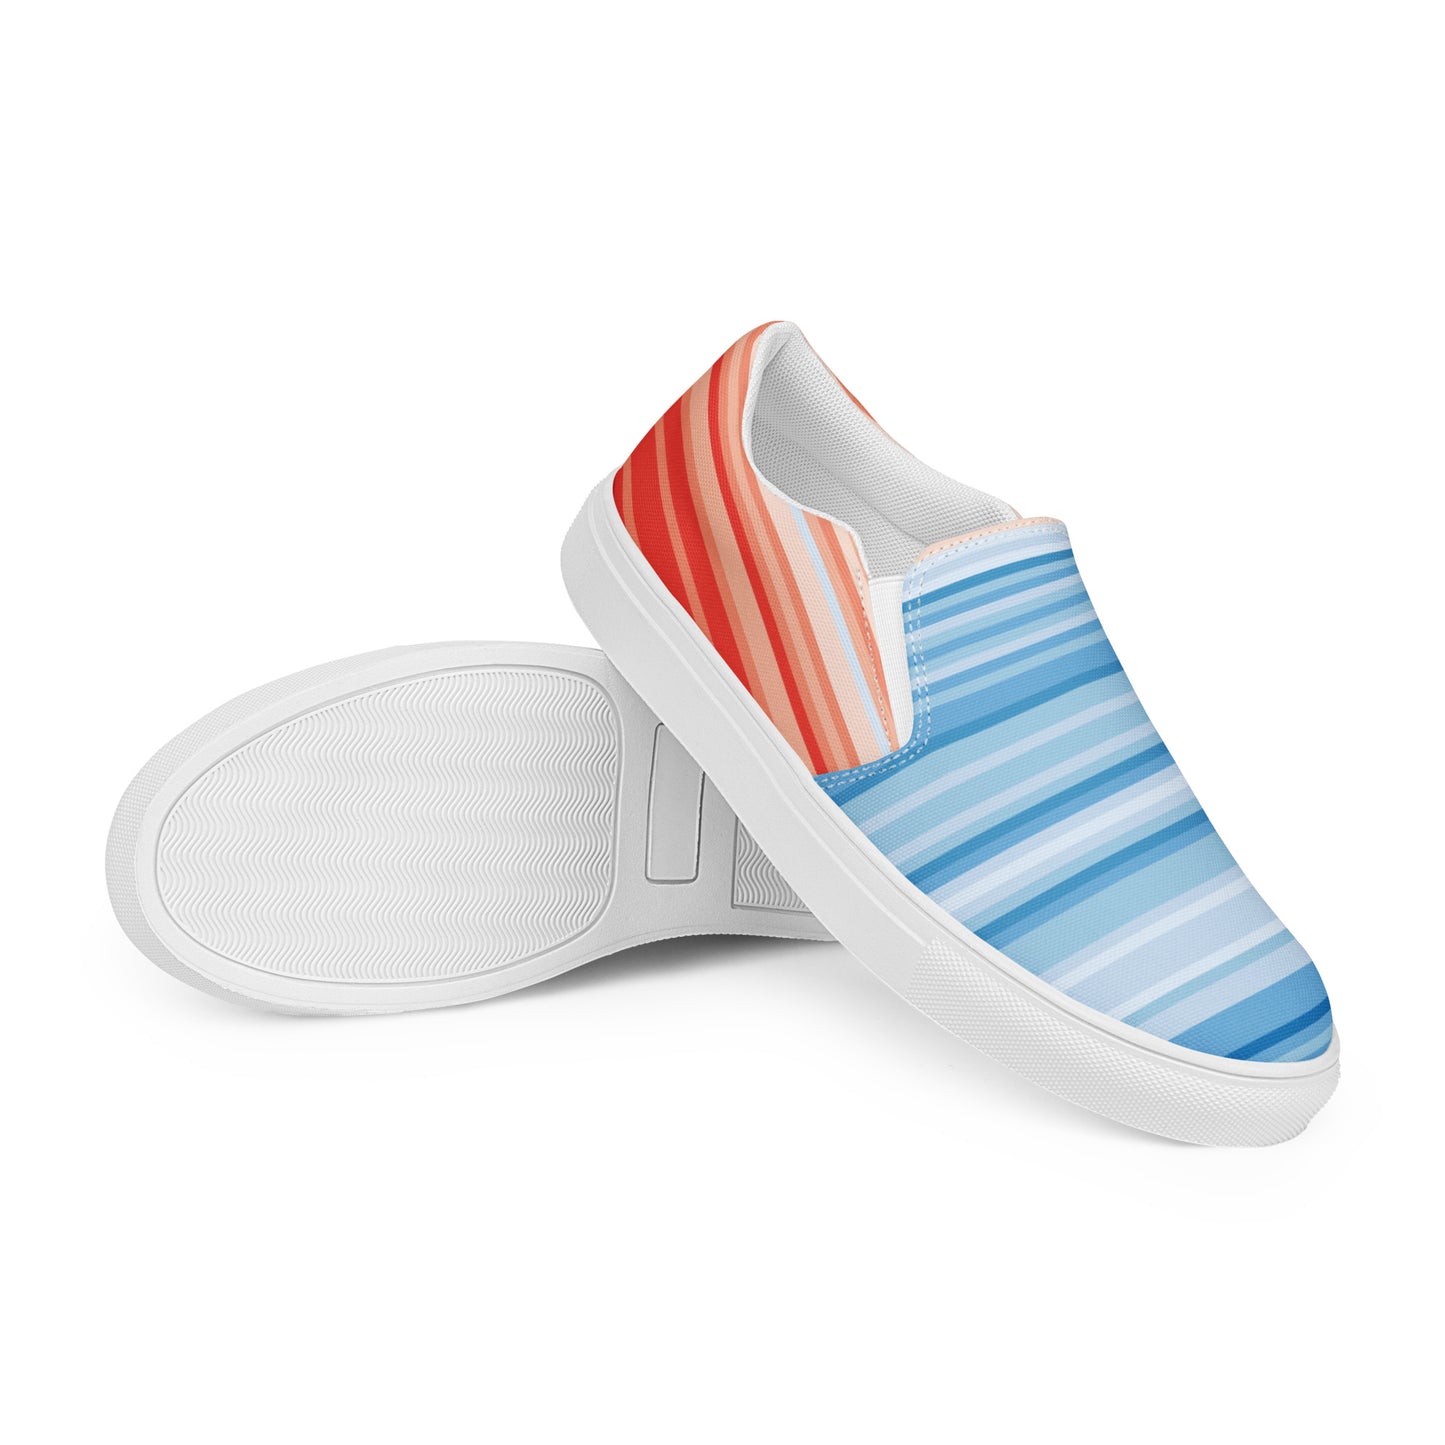 Climate Change Global Warming Stripes - Sustainably Made Women’s slip-on canvas shoes